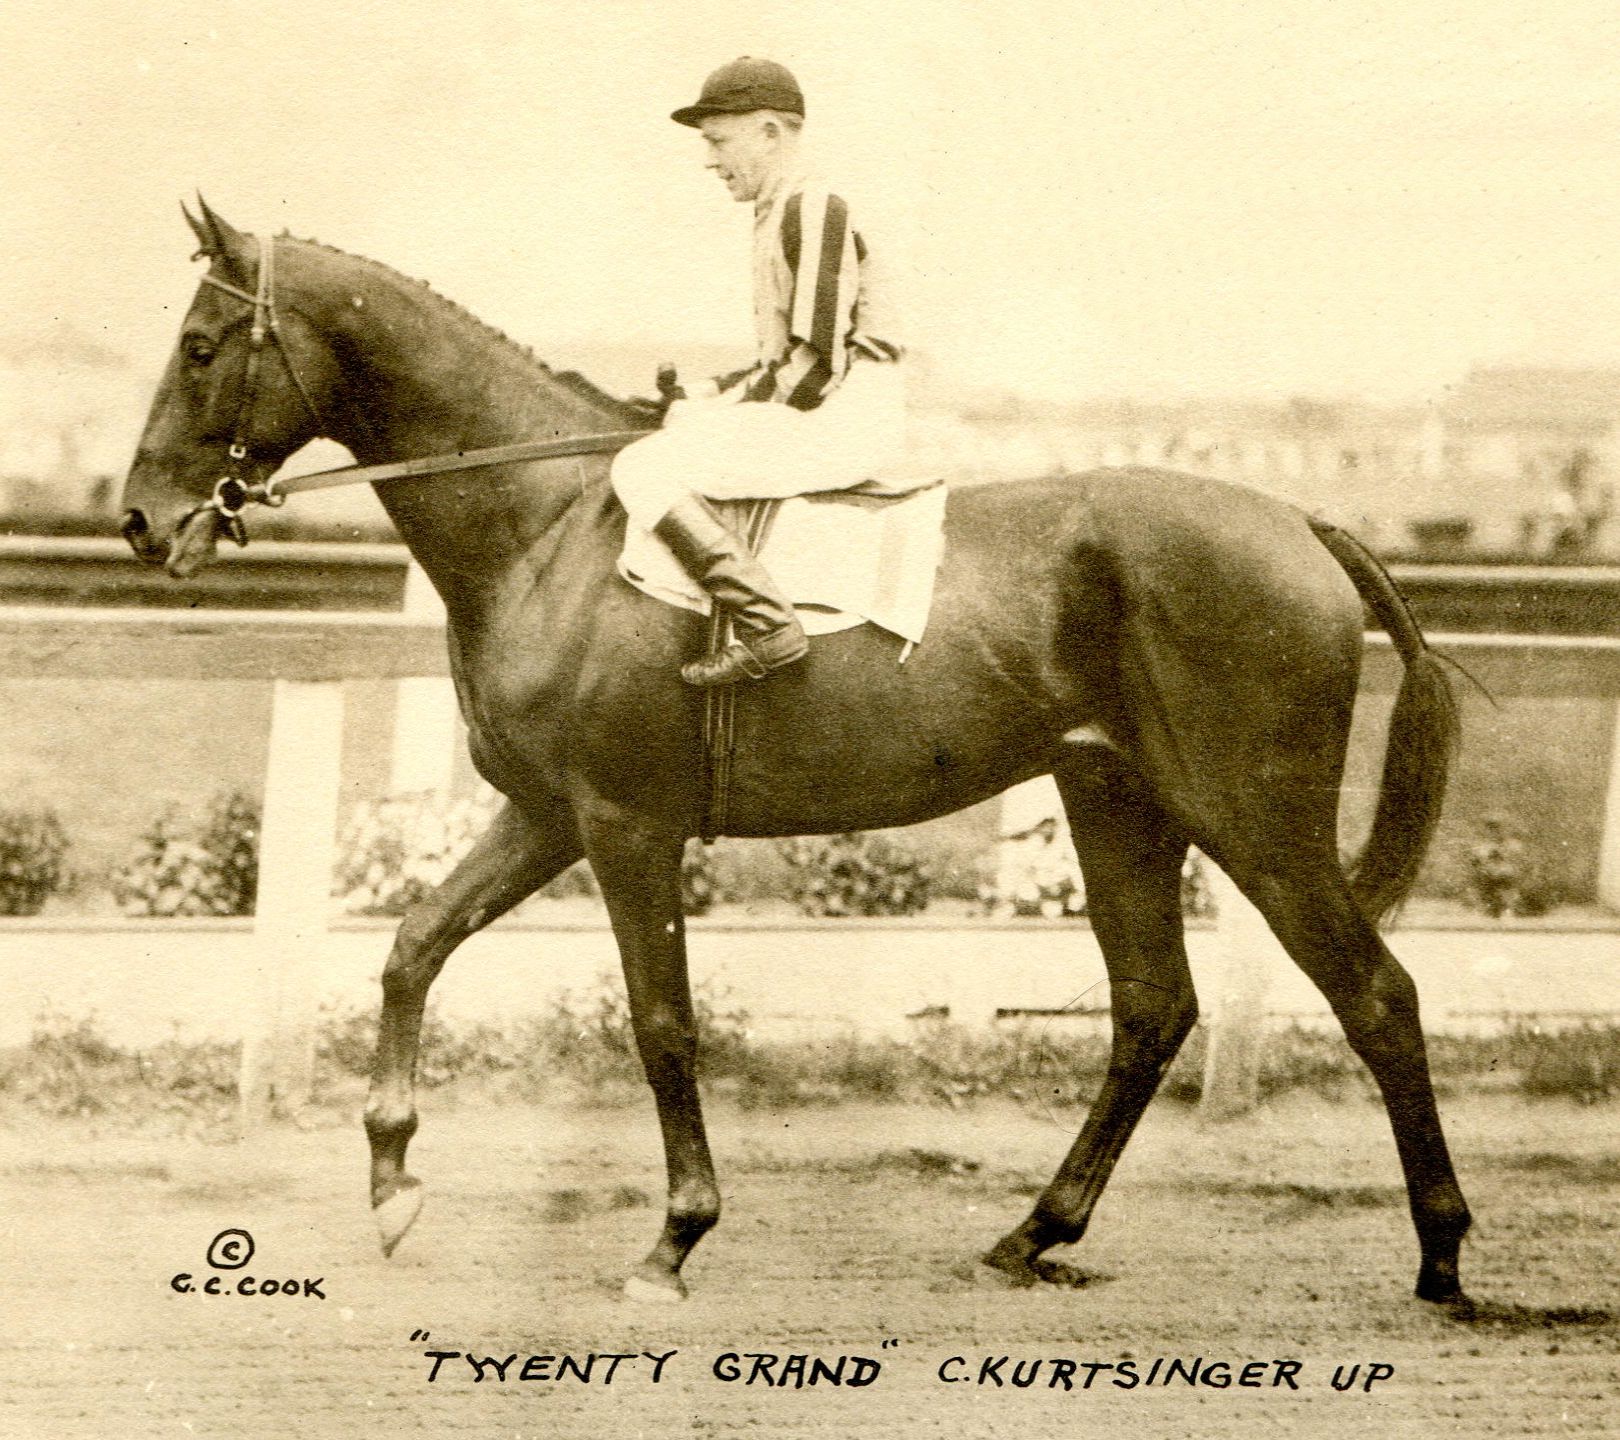 The 1931 Jockey Club Gold Cup, won by Twenty Grand (Charles Kurtsinger up)  (C. C. Cook/Museum Collection)